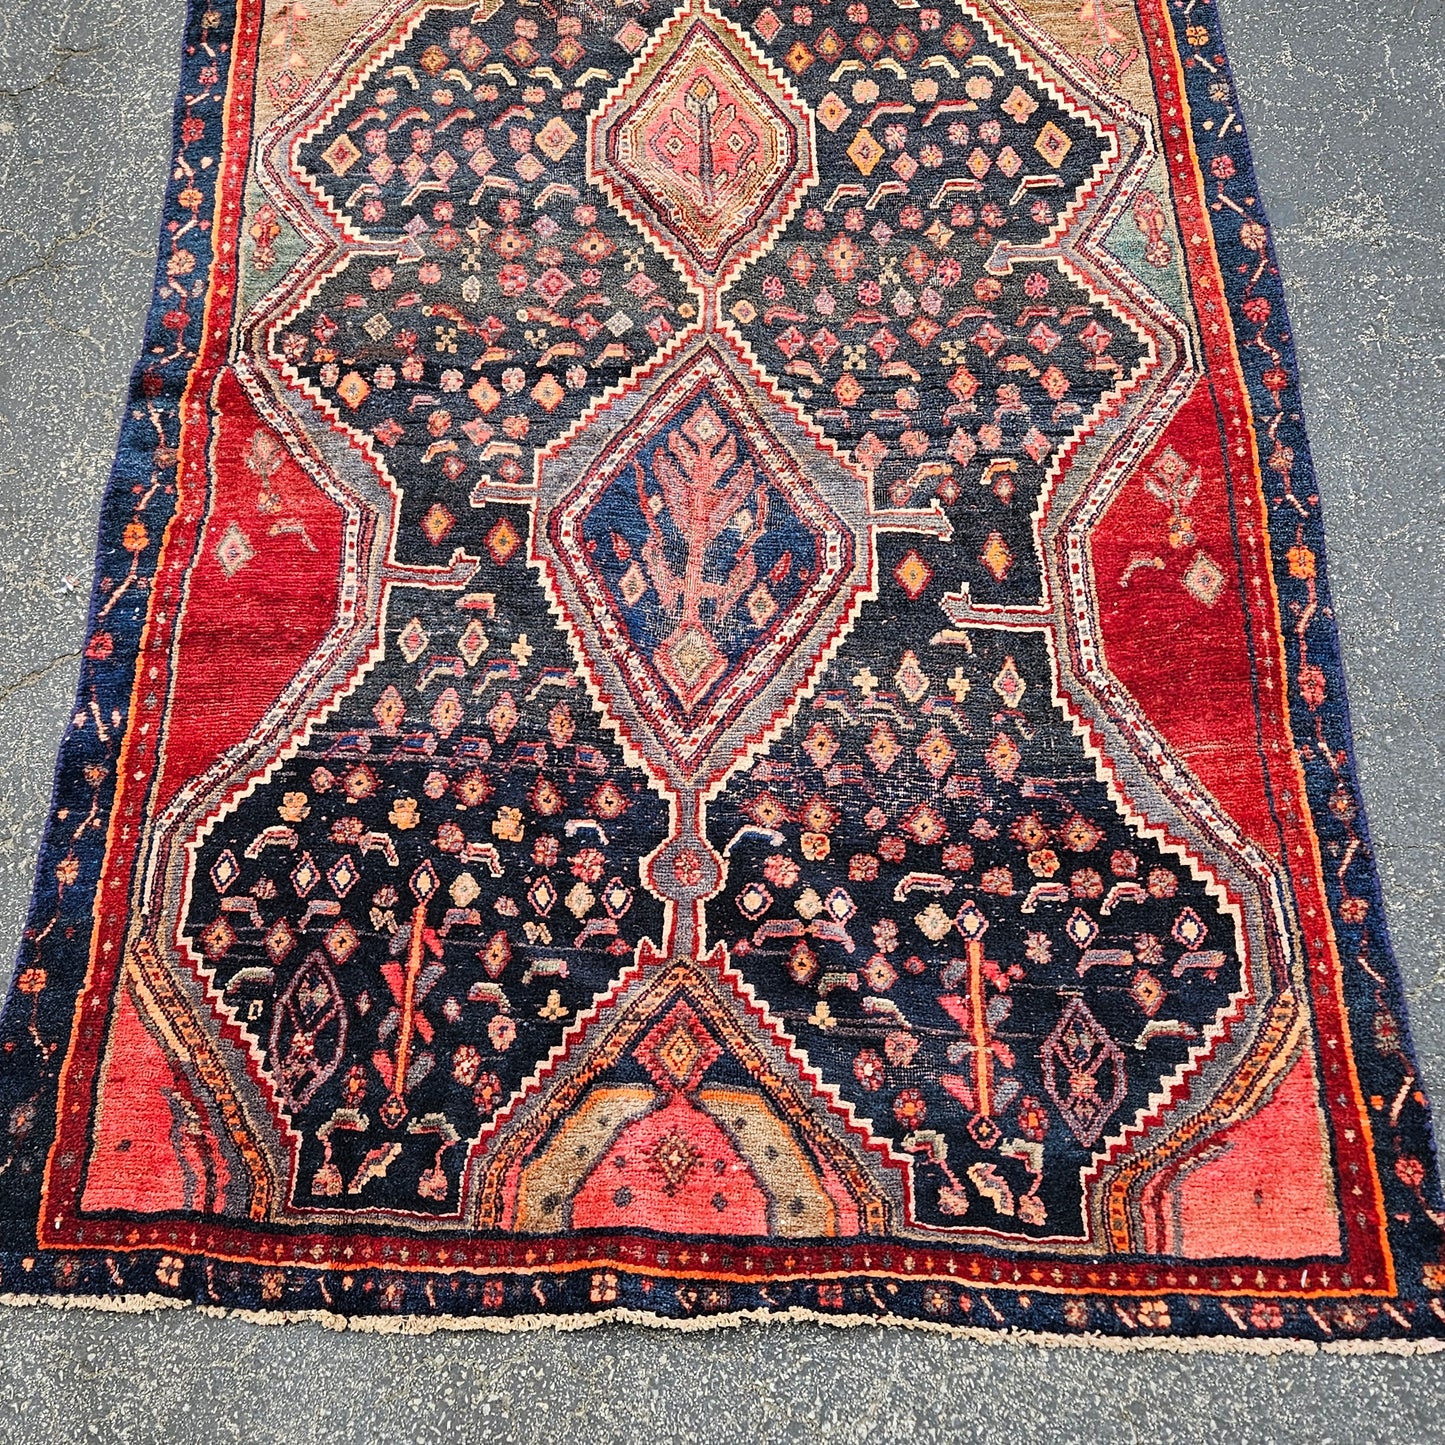 Antique 100% Wool Hand Knotted Red Runner Rug ~ 4' 6" x 10' 10"